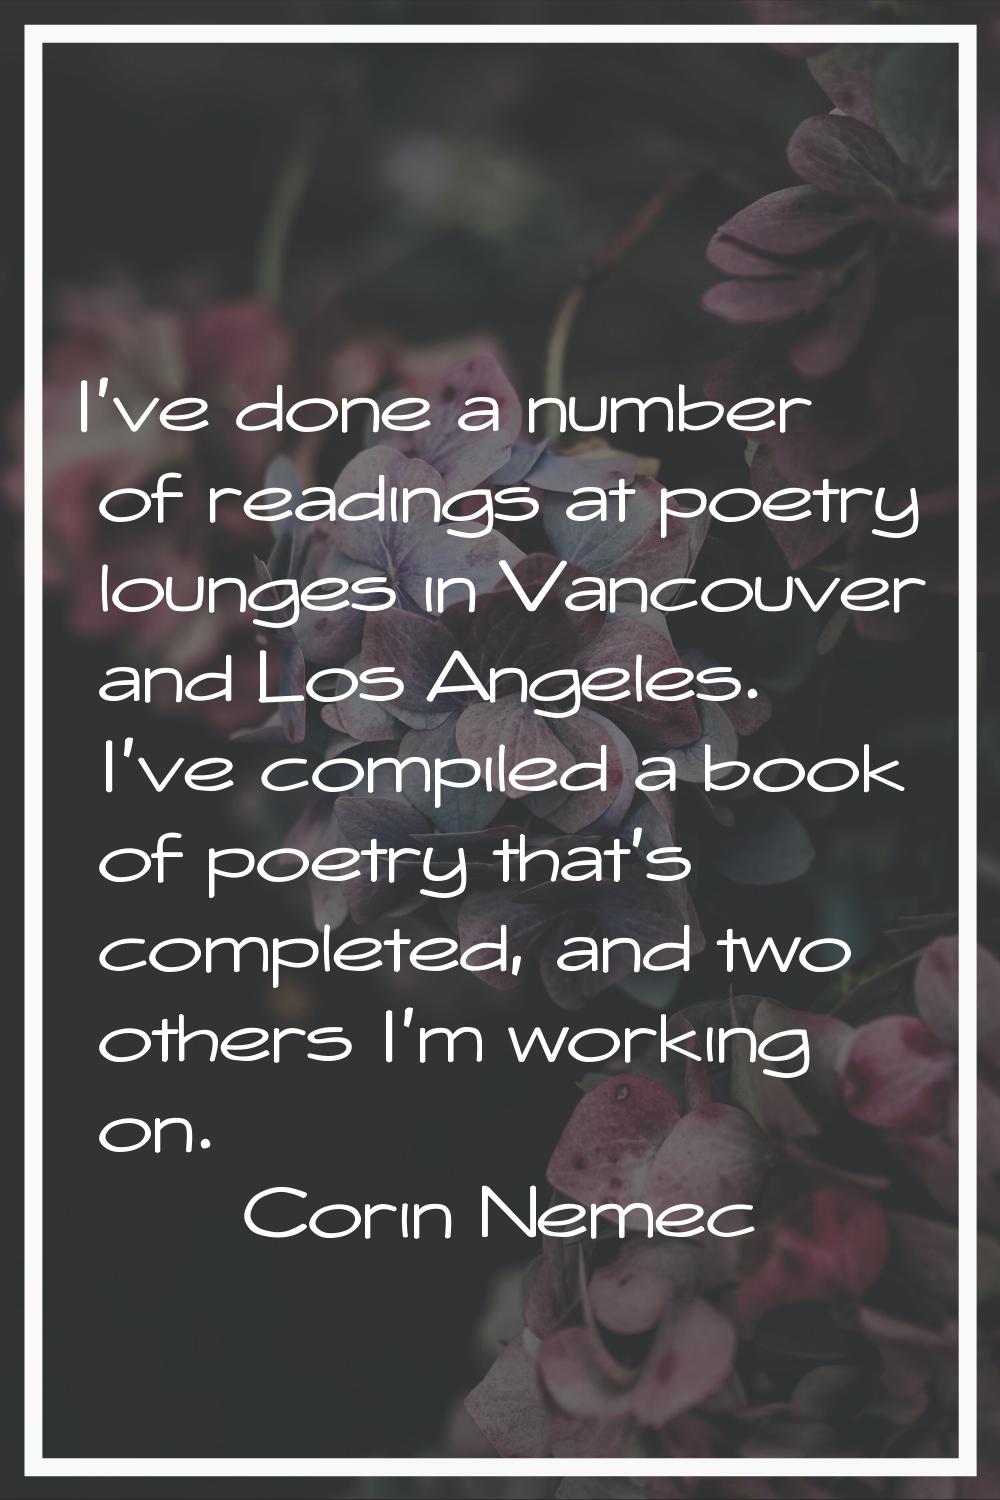 I've done a number of readings at poetry lounges in Vancouver and Los Angeles. I've compiled a book